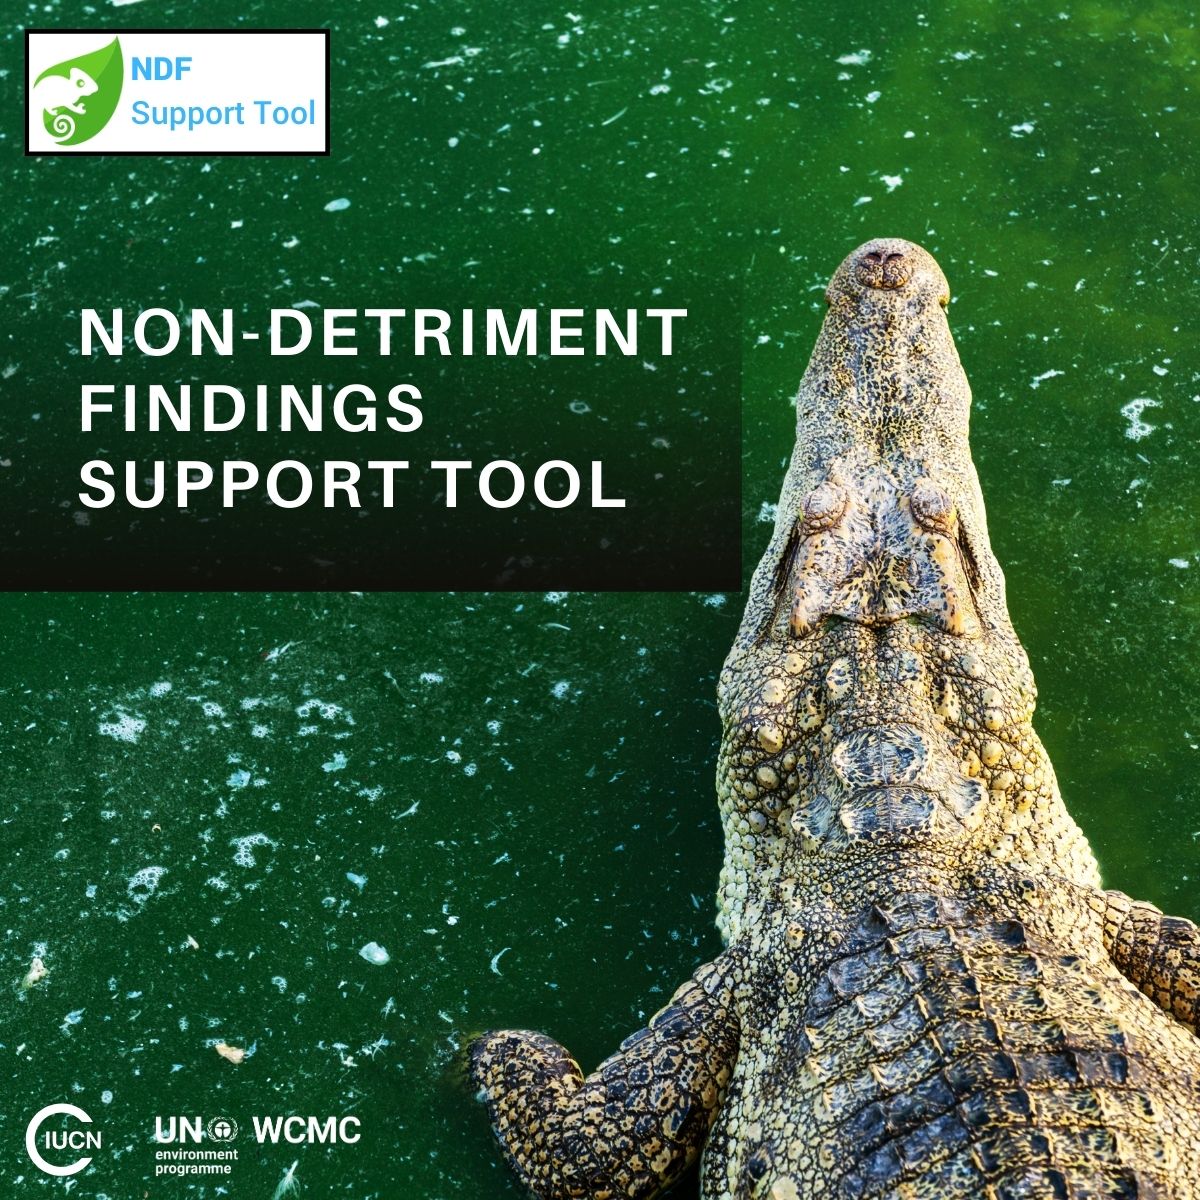 The NDF tool, launched by UNEP-WCMC and @IUCN provides easy-to-access key datasets for @CITES Authorities and also helps decision-makers ensure that international wildlife trade is sustainable. Learn more about the tool here: tinyurl.com/bd4rm7cd